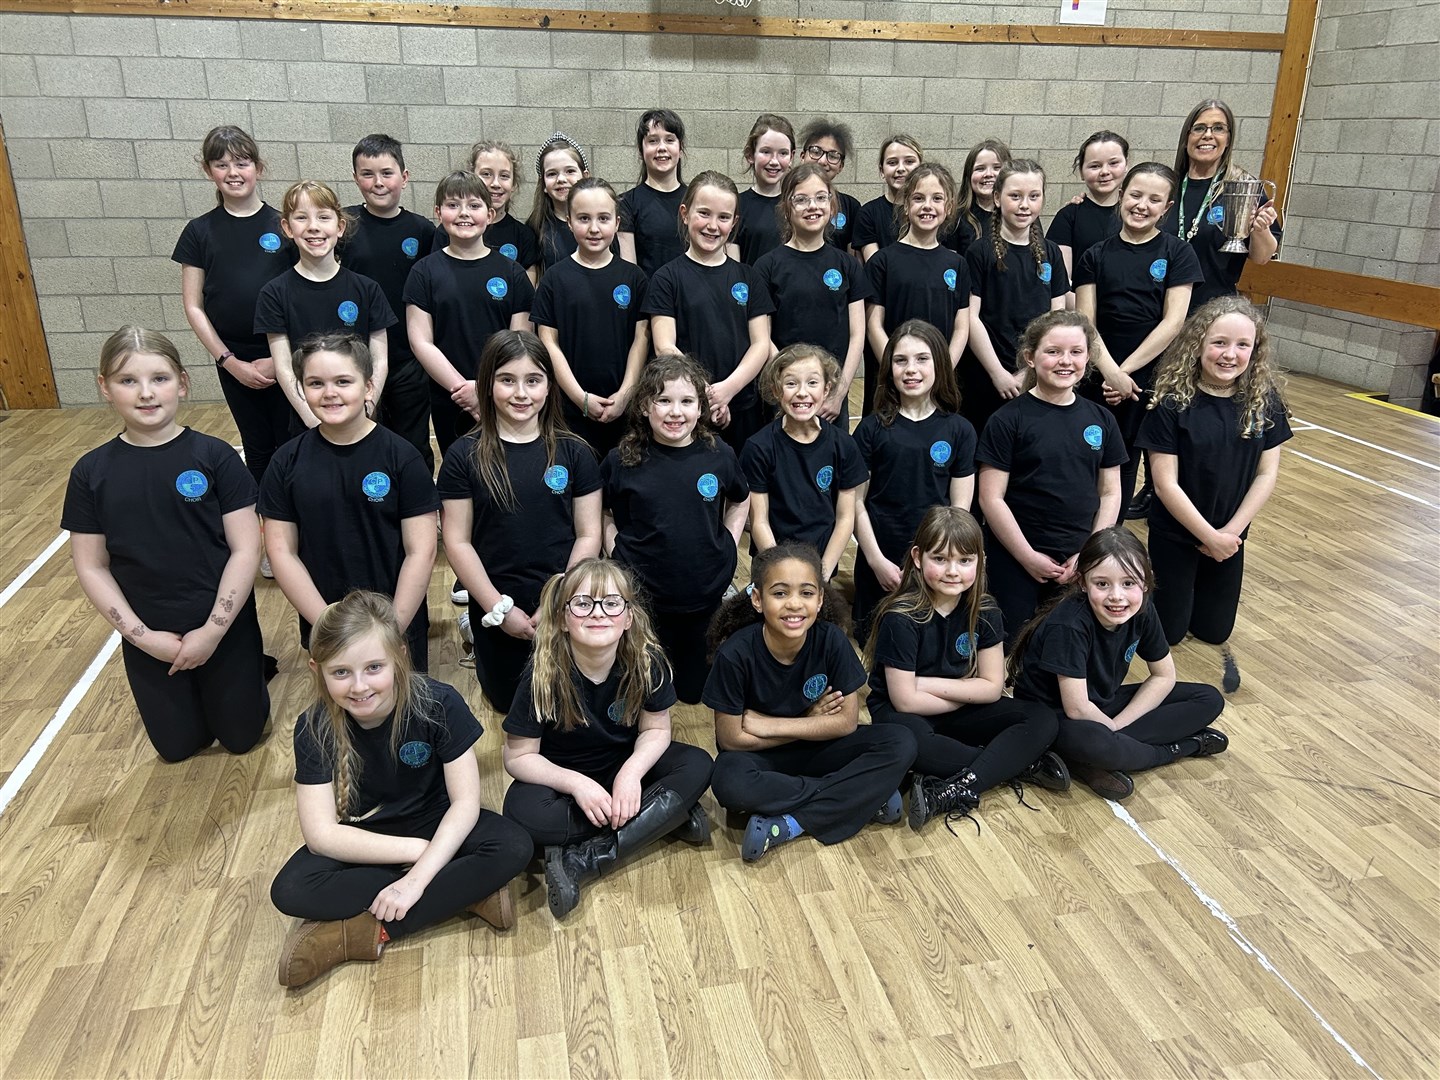 Craighill Primary's choir was once again on song at the musica festival, this time with their take on California Dreaming'. Picture courtesy of Craighill Primary.